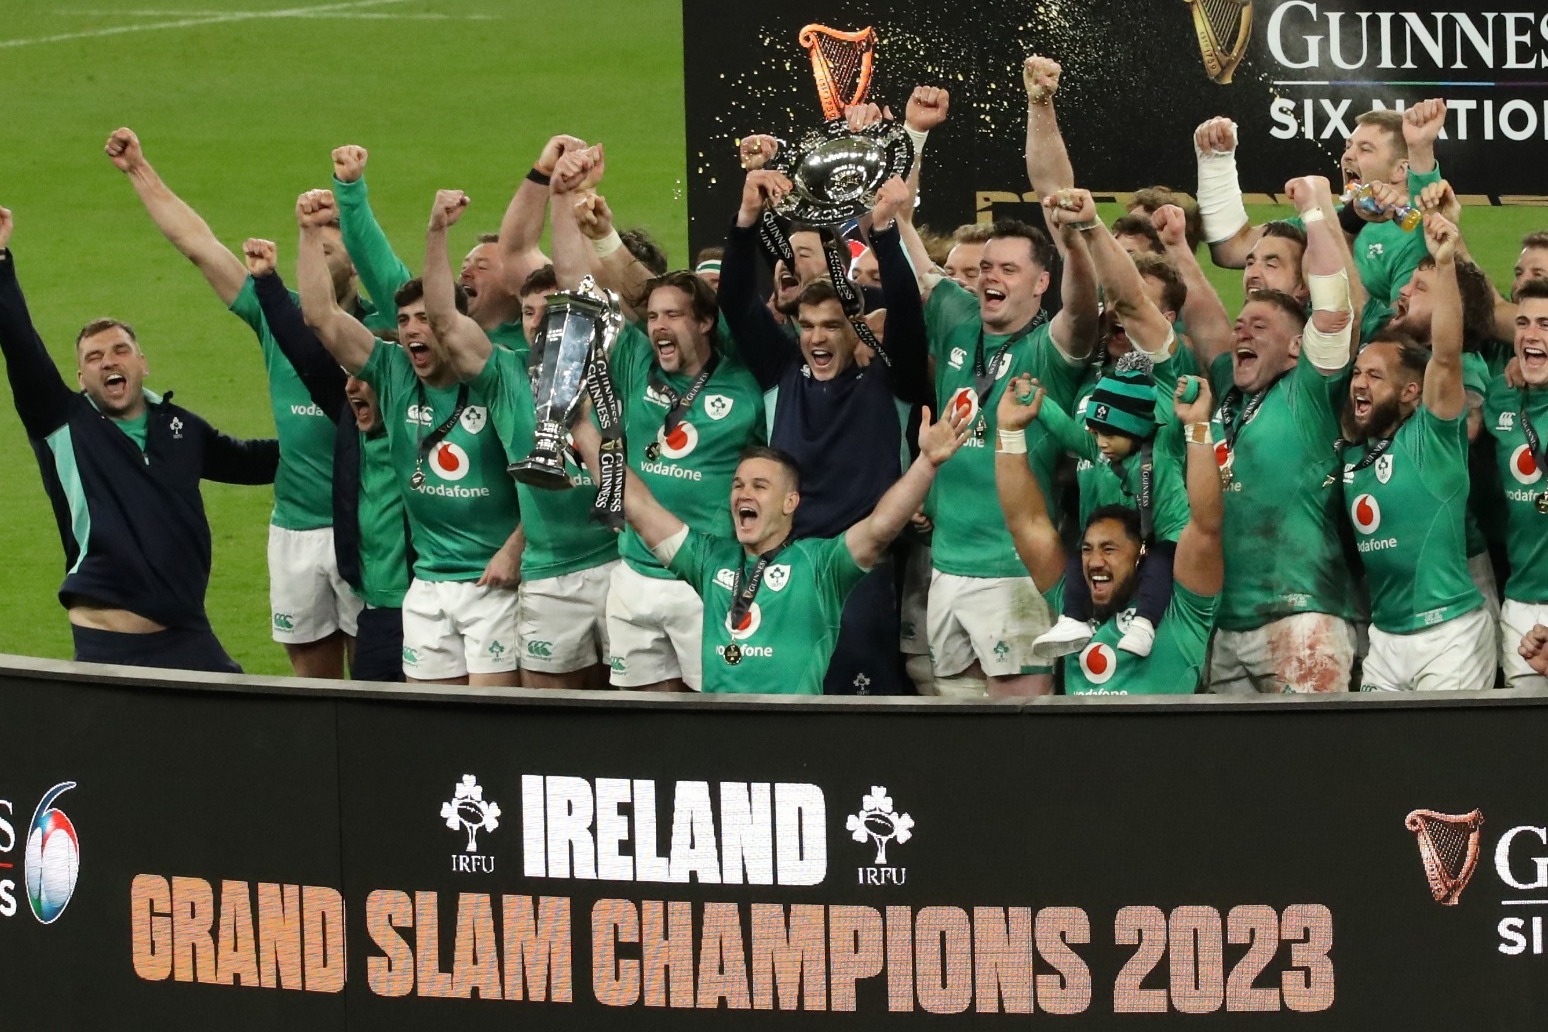 Committee calls for Six Nations to be protected as free-to-air TV institution 